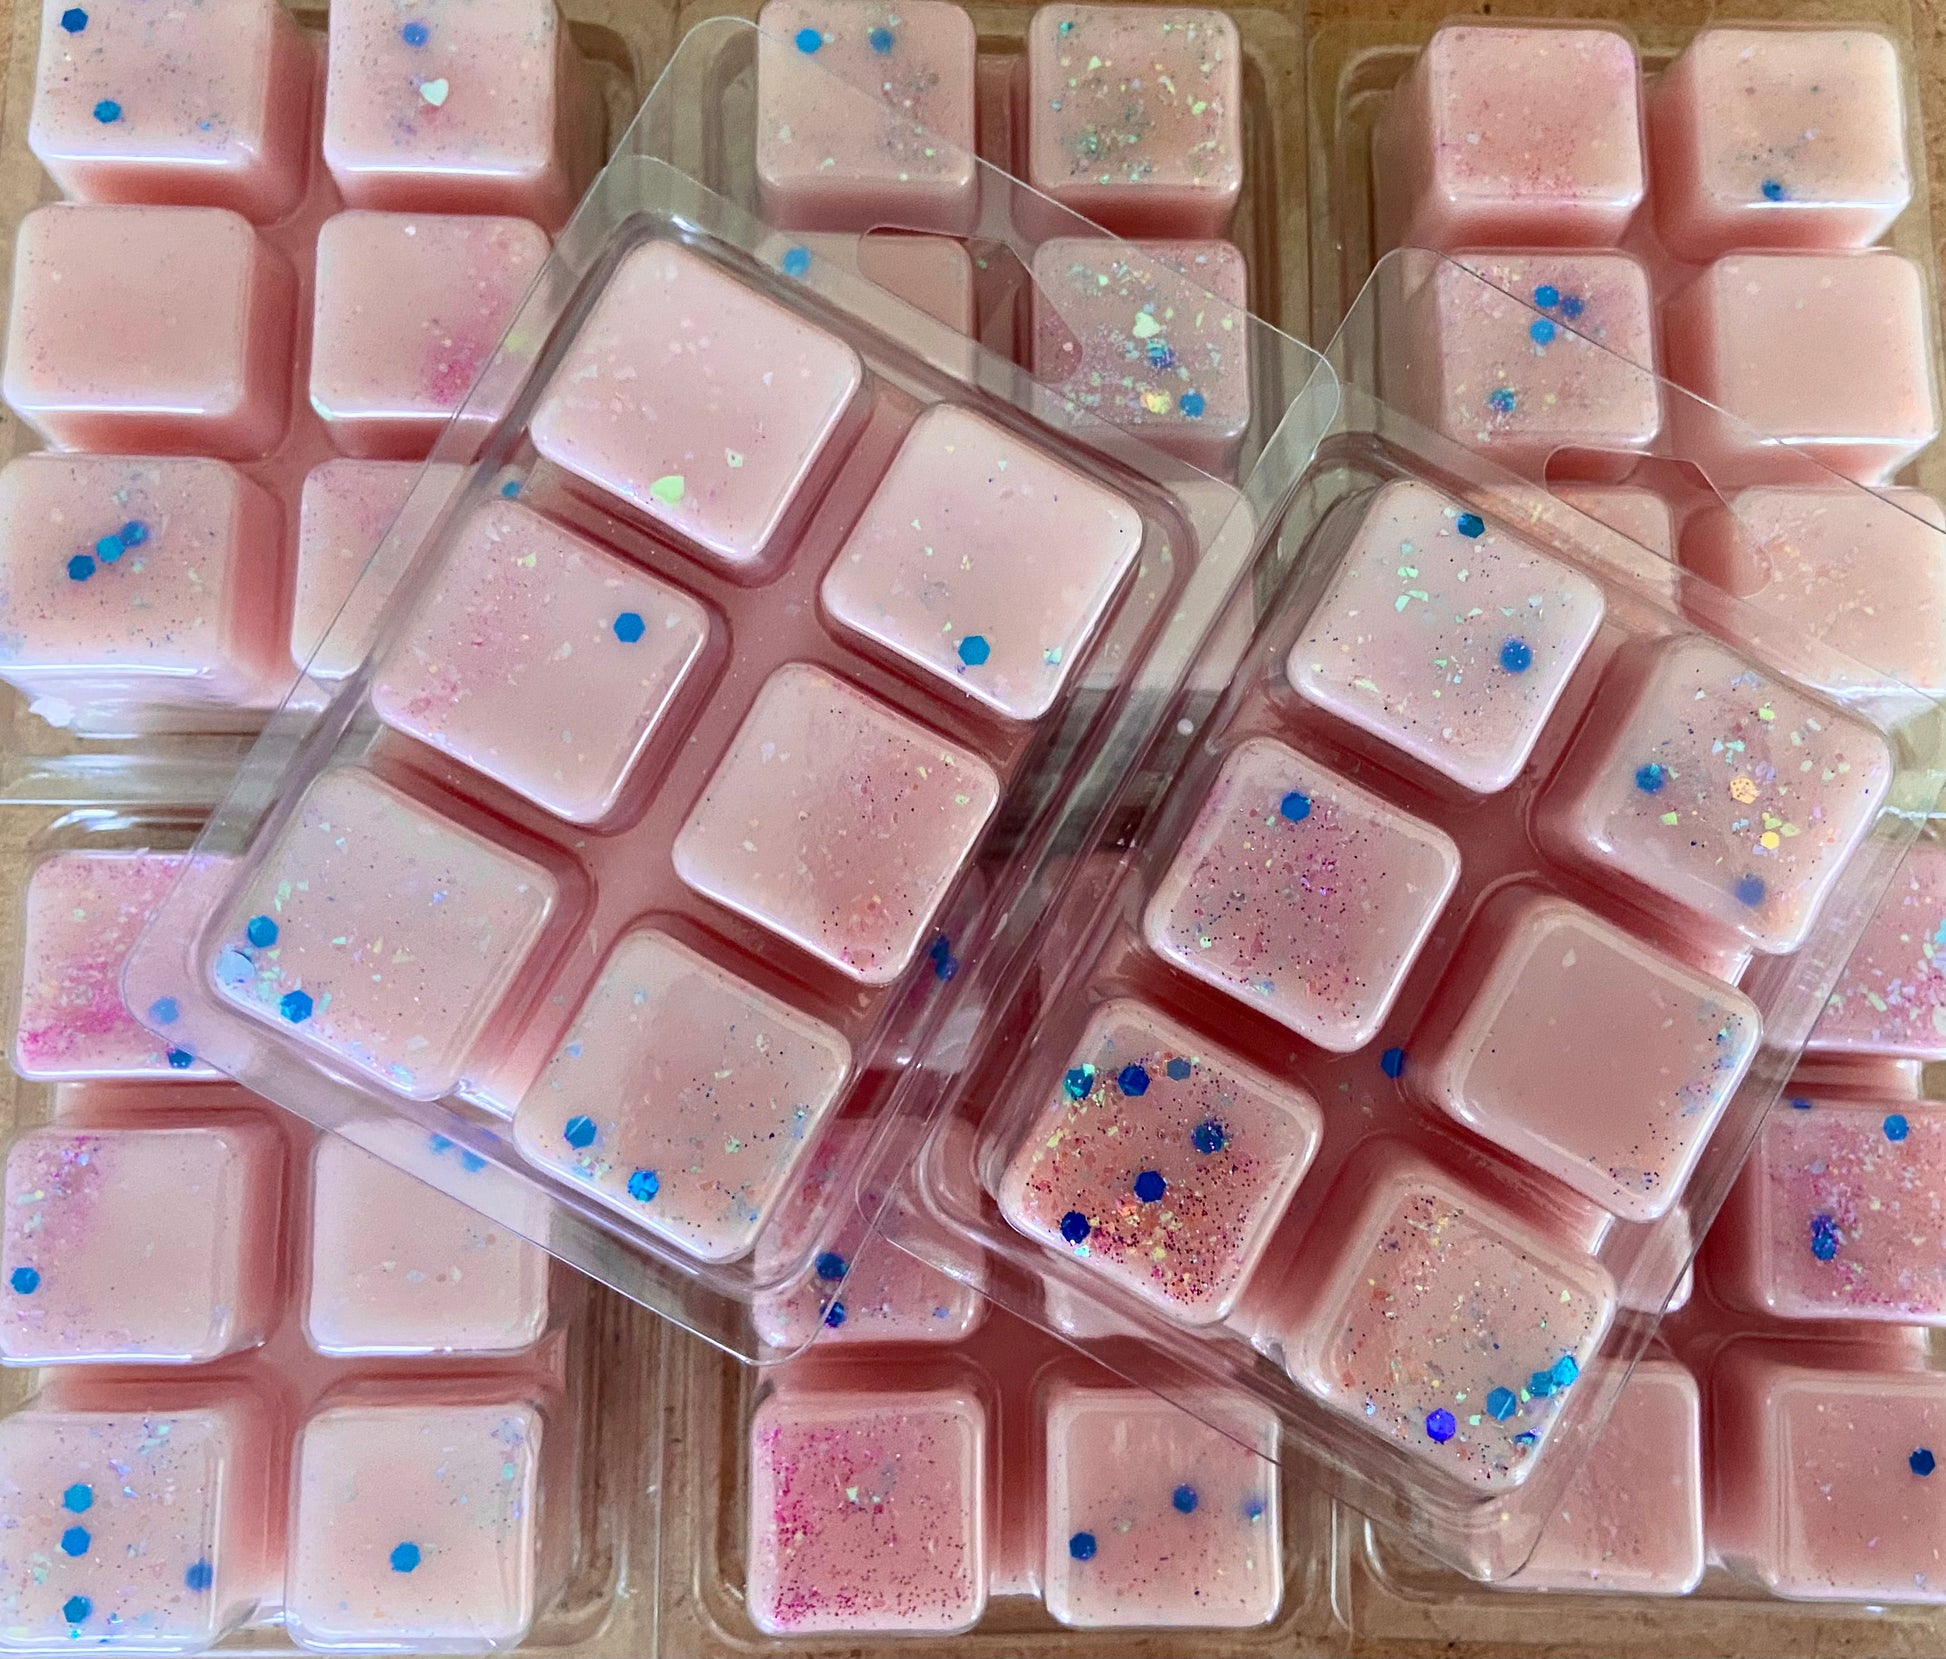 Packages of pink sprinkle-covered fudge neatly arranged, emitting a calming The Soap Gals Baby Powder Wax Melt Snap Bar aroma.